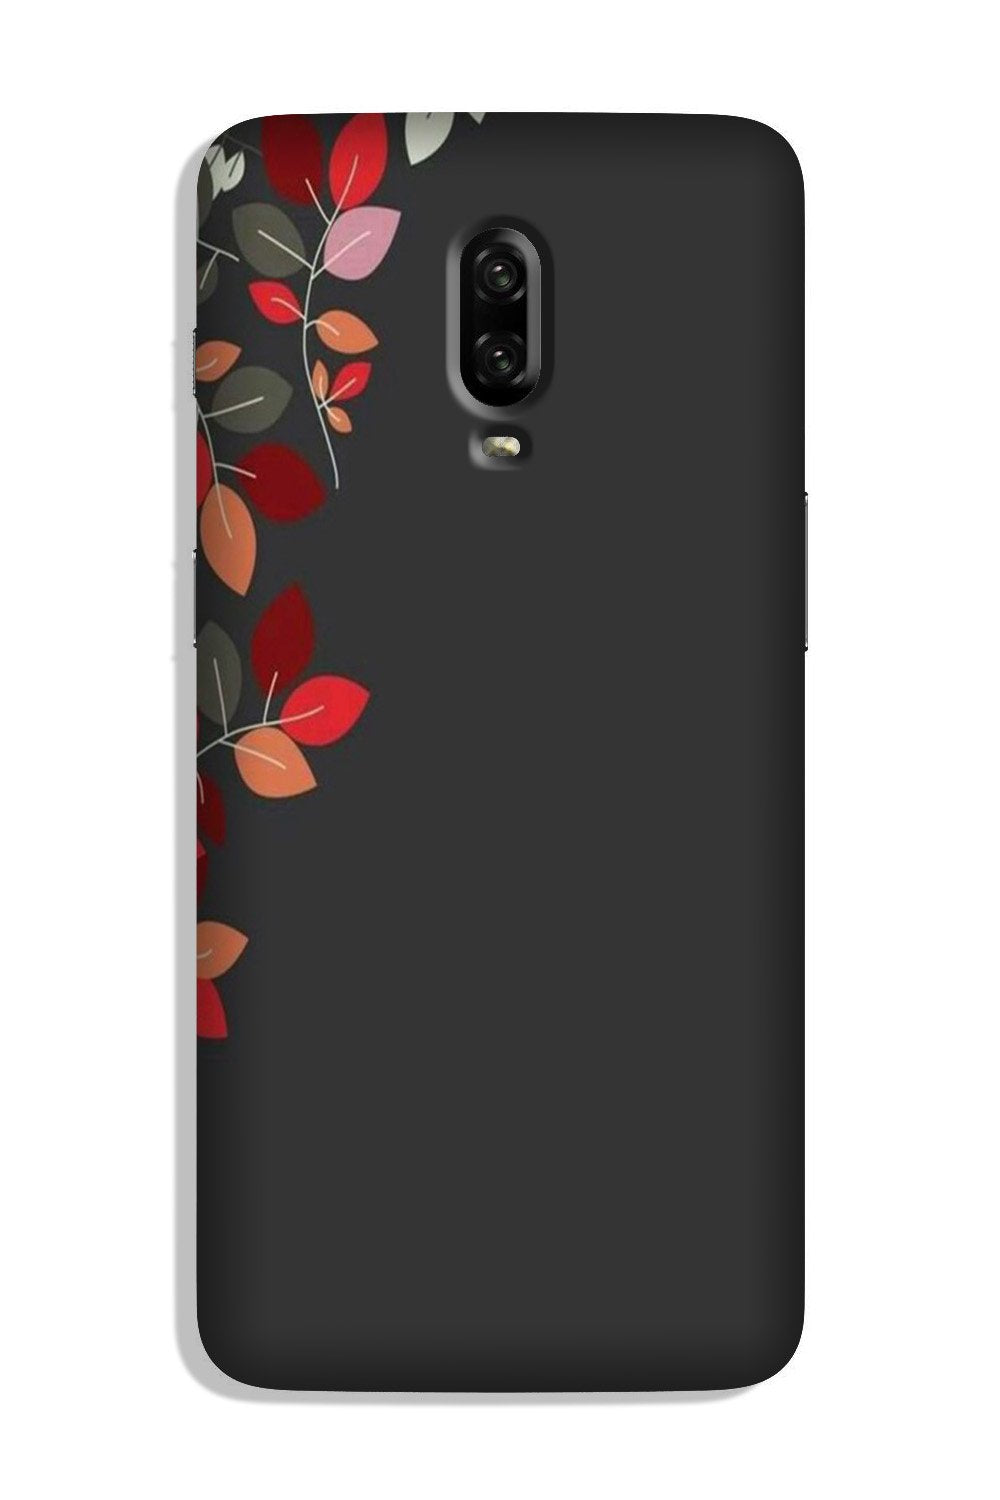 Grey Background Case for OnePlus 7